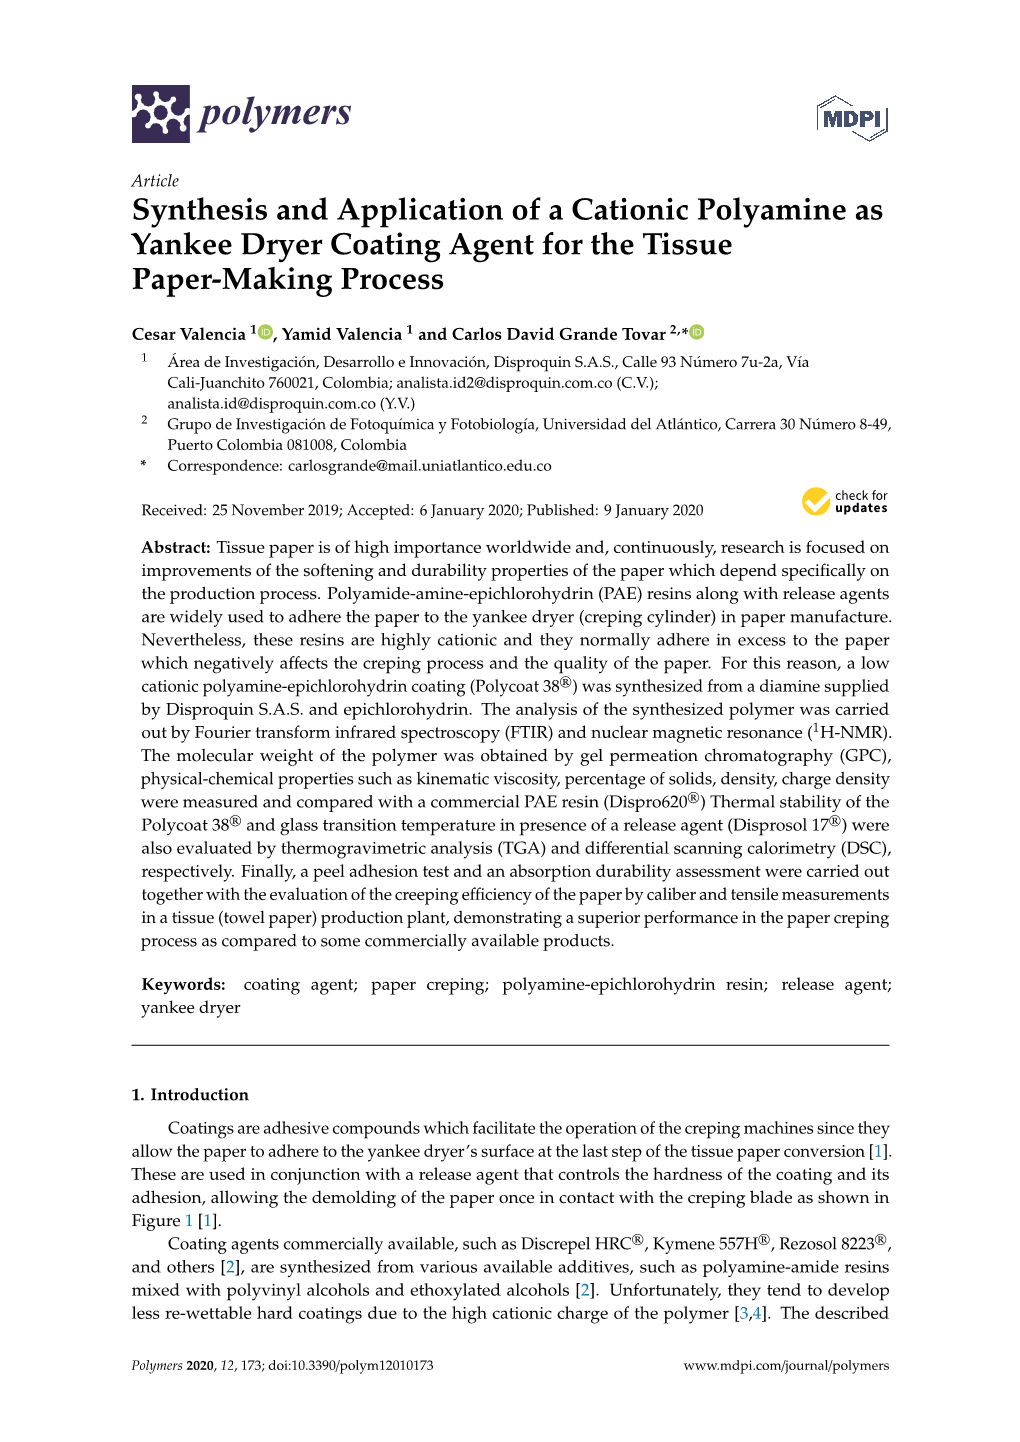 Synthesis and Application of a Cationic Polyamine As Yankee Dryer Coating Agent for the Tissue Paper-Making Process